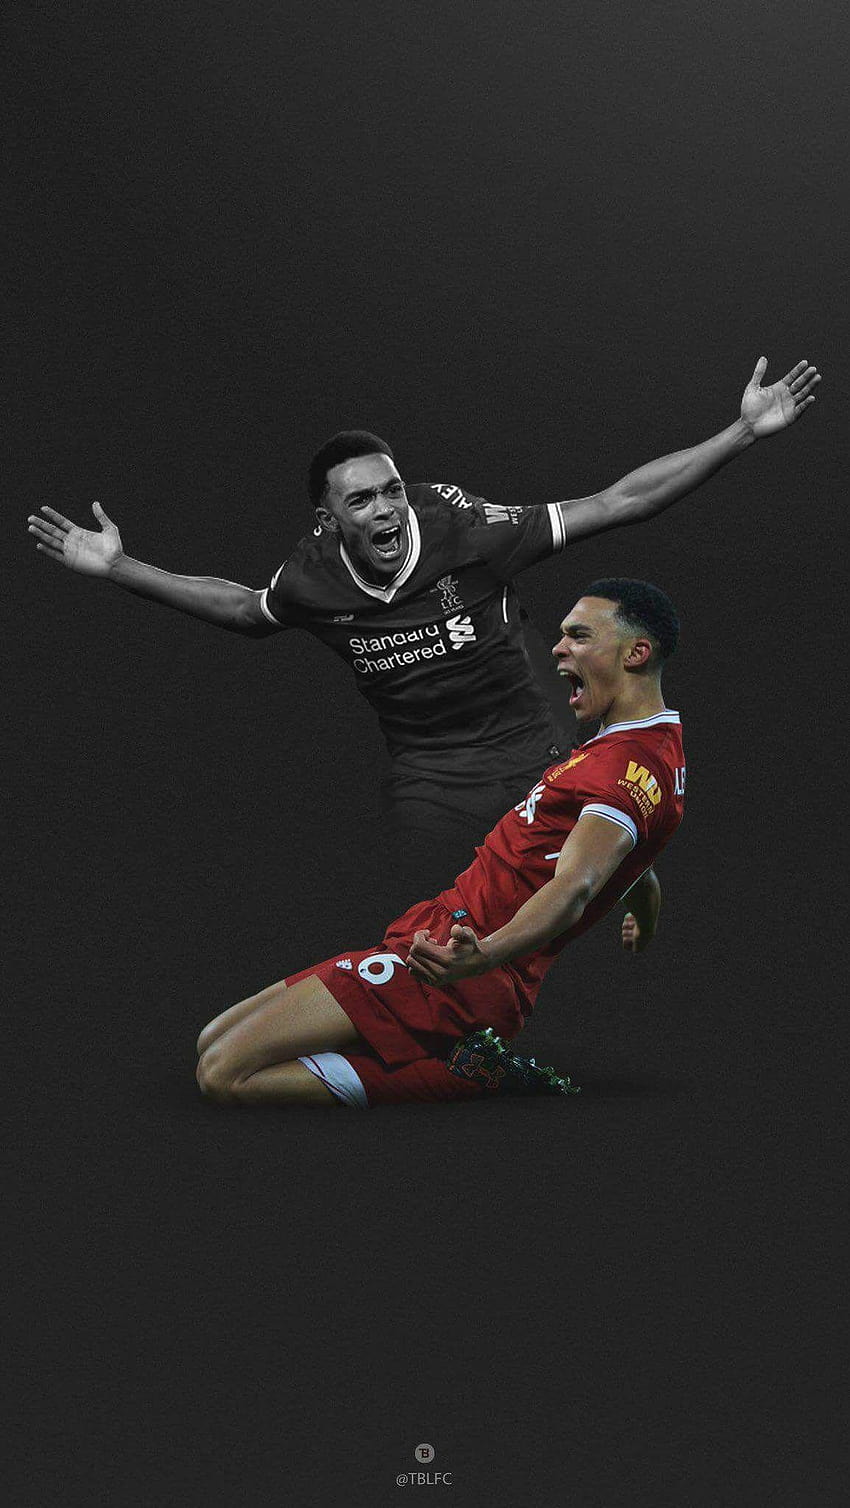 Pin on Liverpool FC, trent alexander arnold mobile HD phone wallpaper